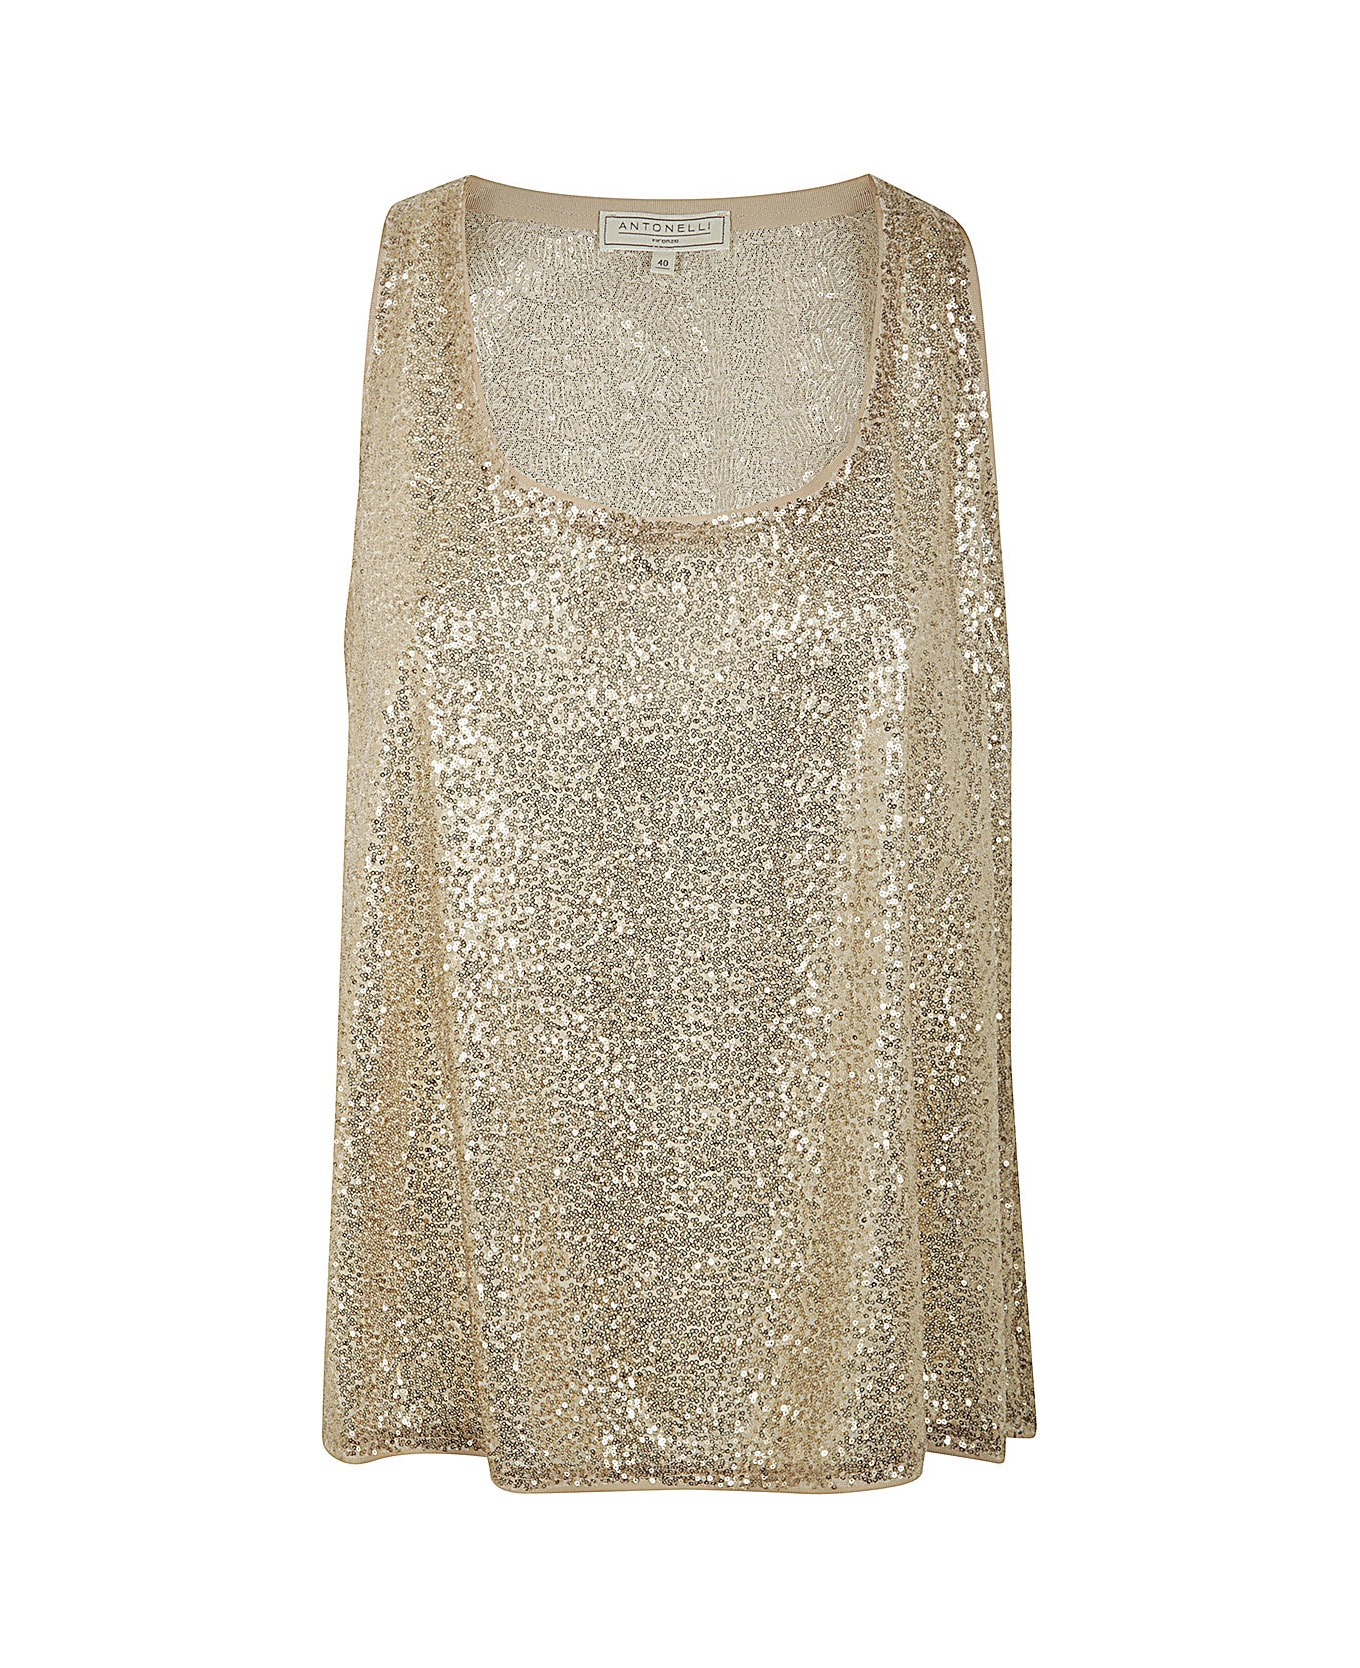 Antonelli Cecil Top With Paillettes - Gold トップス